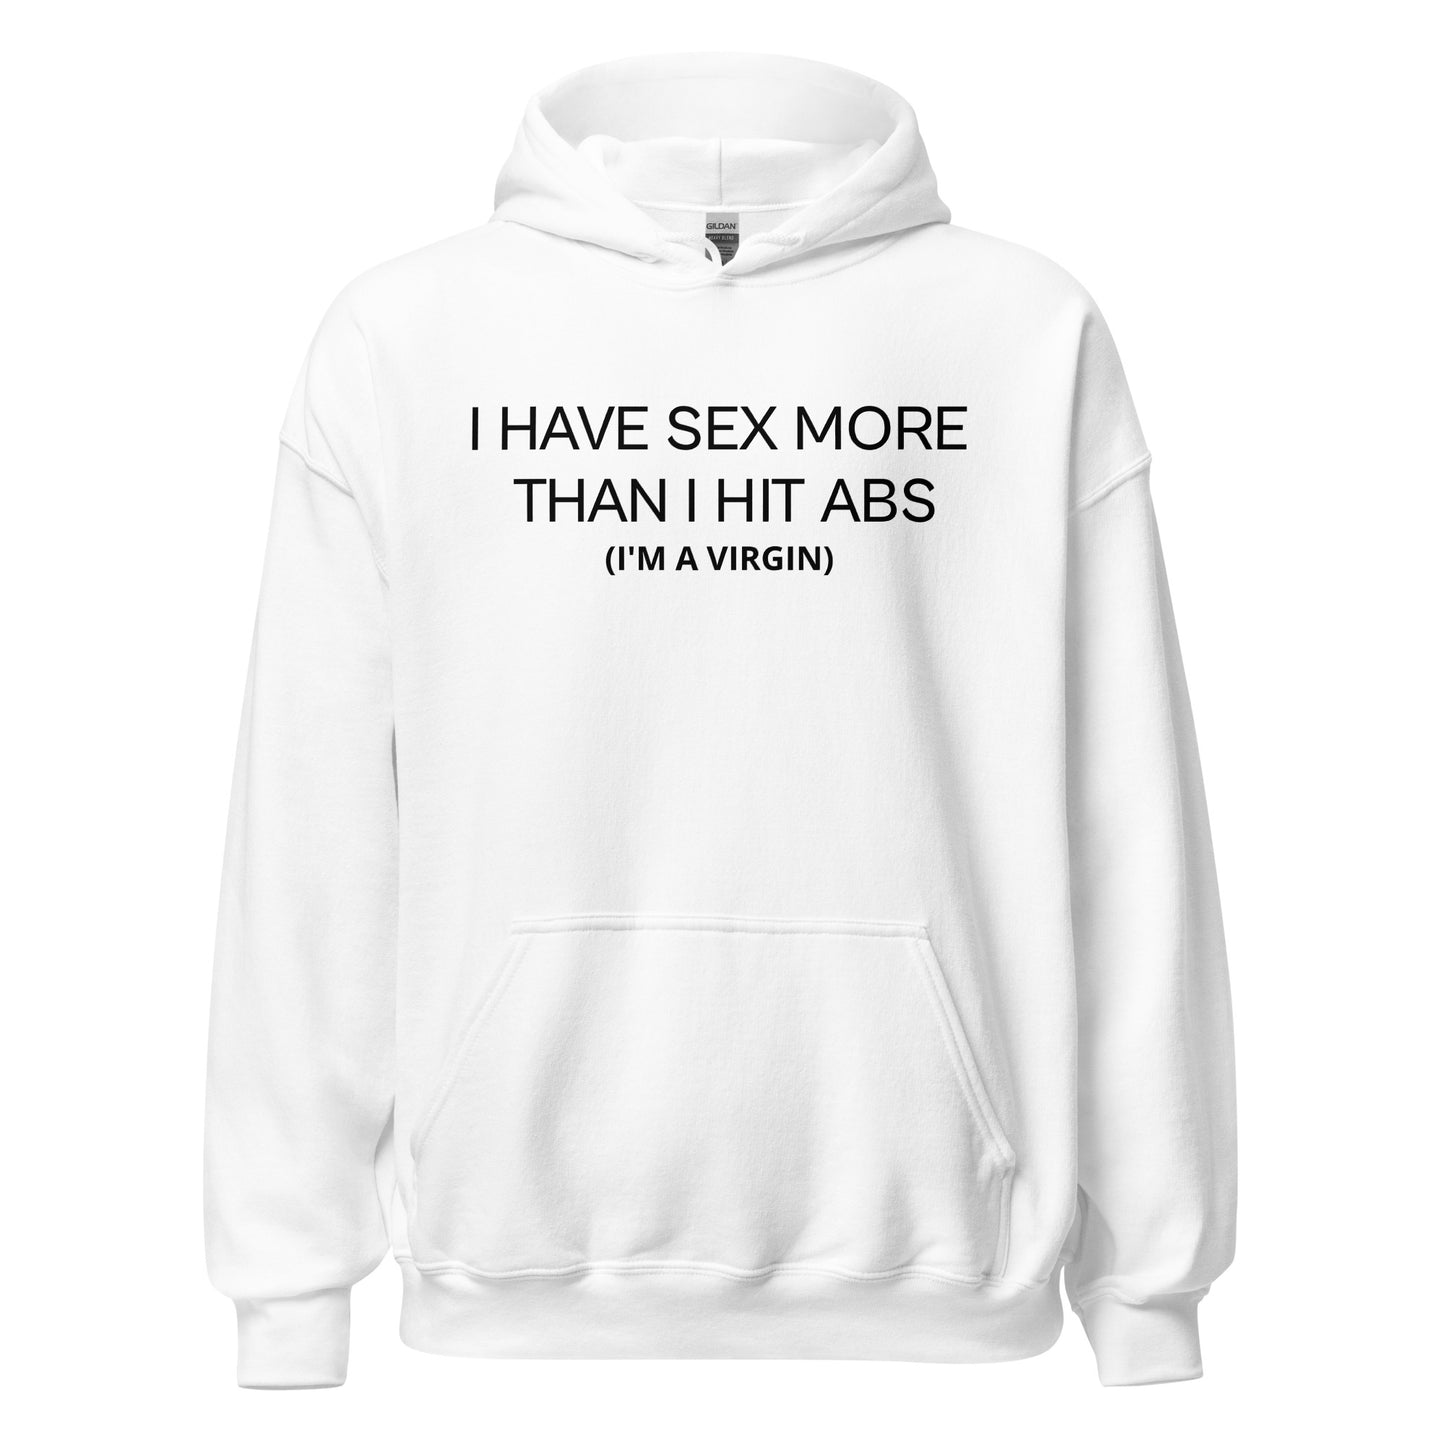 I HAVE SEX MORE THAN I HIT ABS